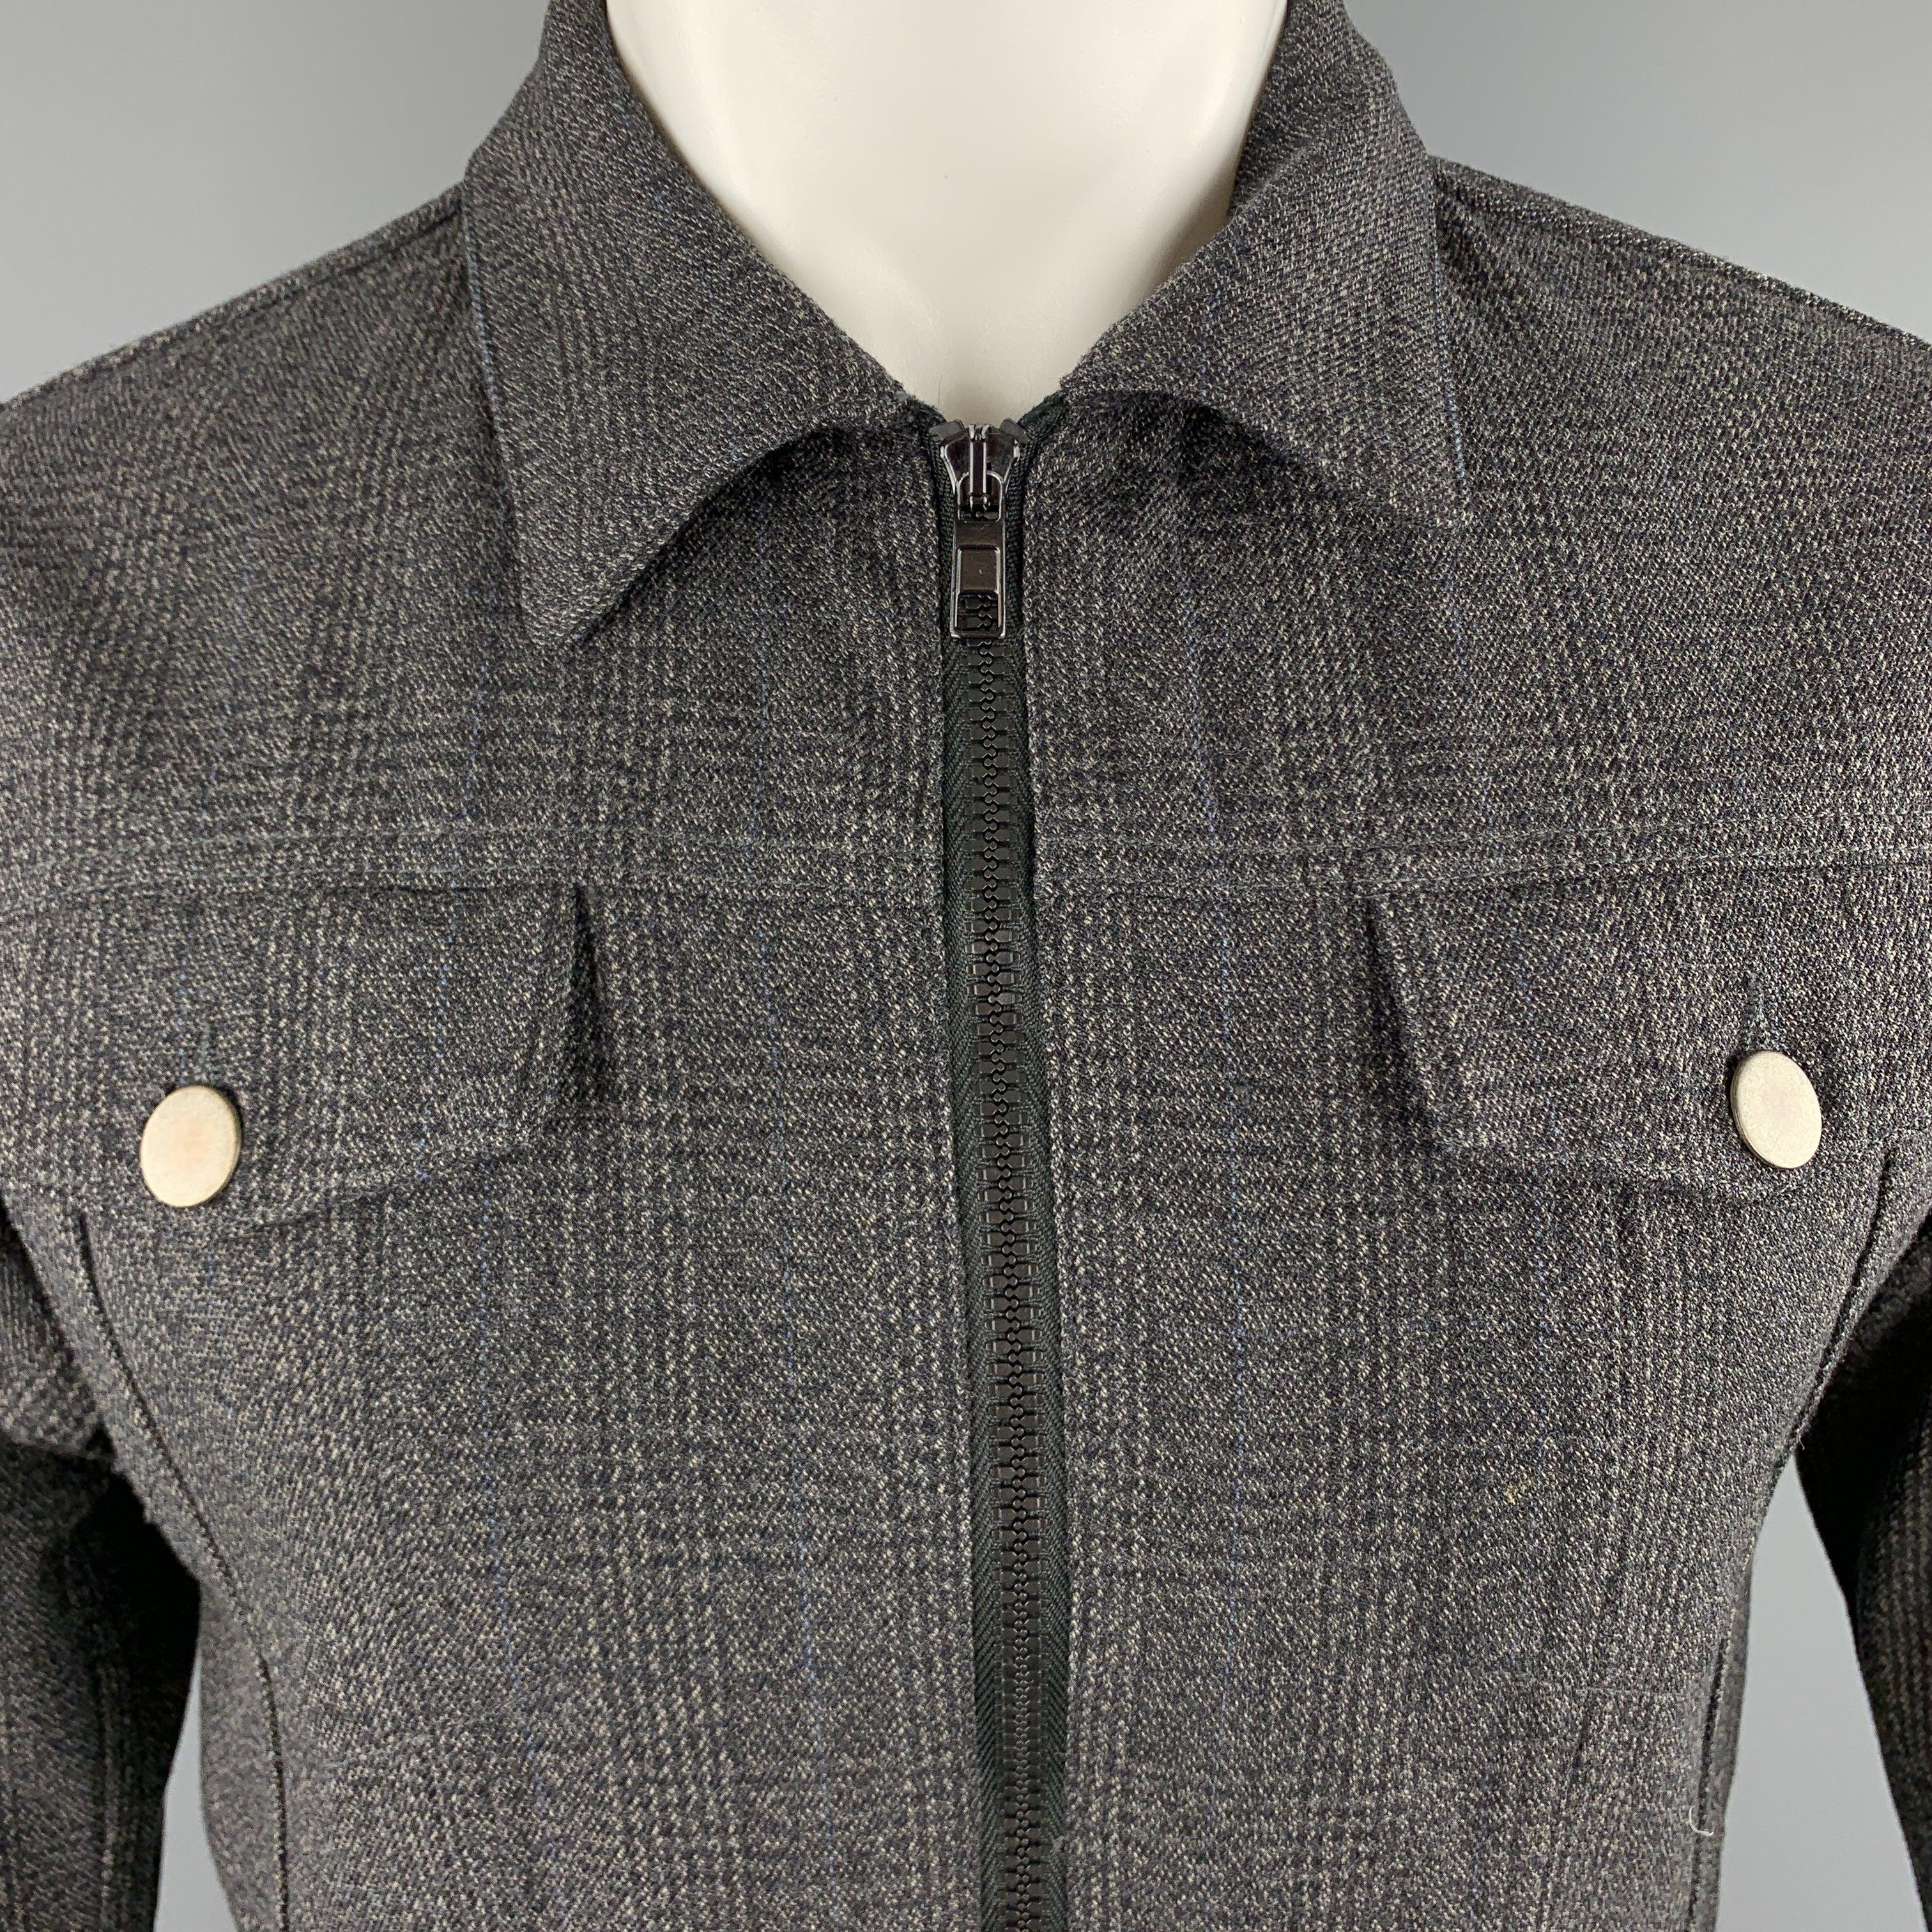 MARC JACOBS trucker jacket comes in gray glenplaid woven yack material with a pointed collar, flap pockets, and zip front. Made in Italy.Excellent
Pre-Owned Condition. 

Marked:   IT 46 

Measurements: 
 
Shoulder:
15 inches Chest:
40 inches